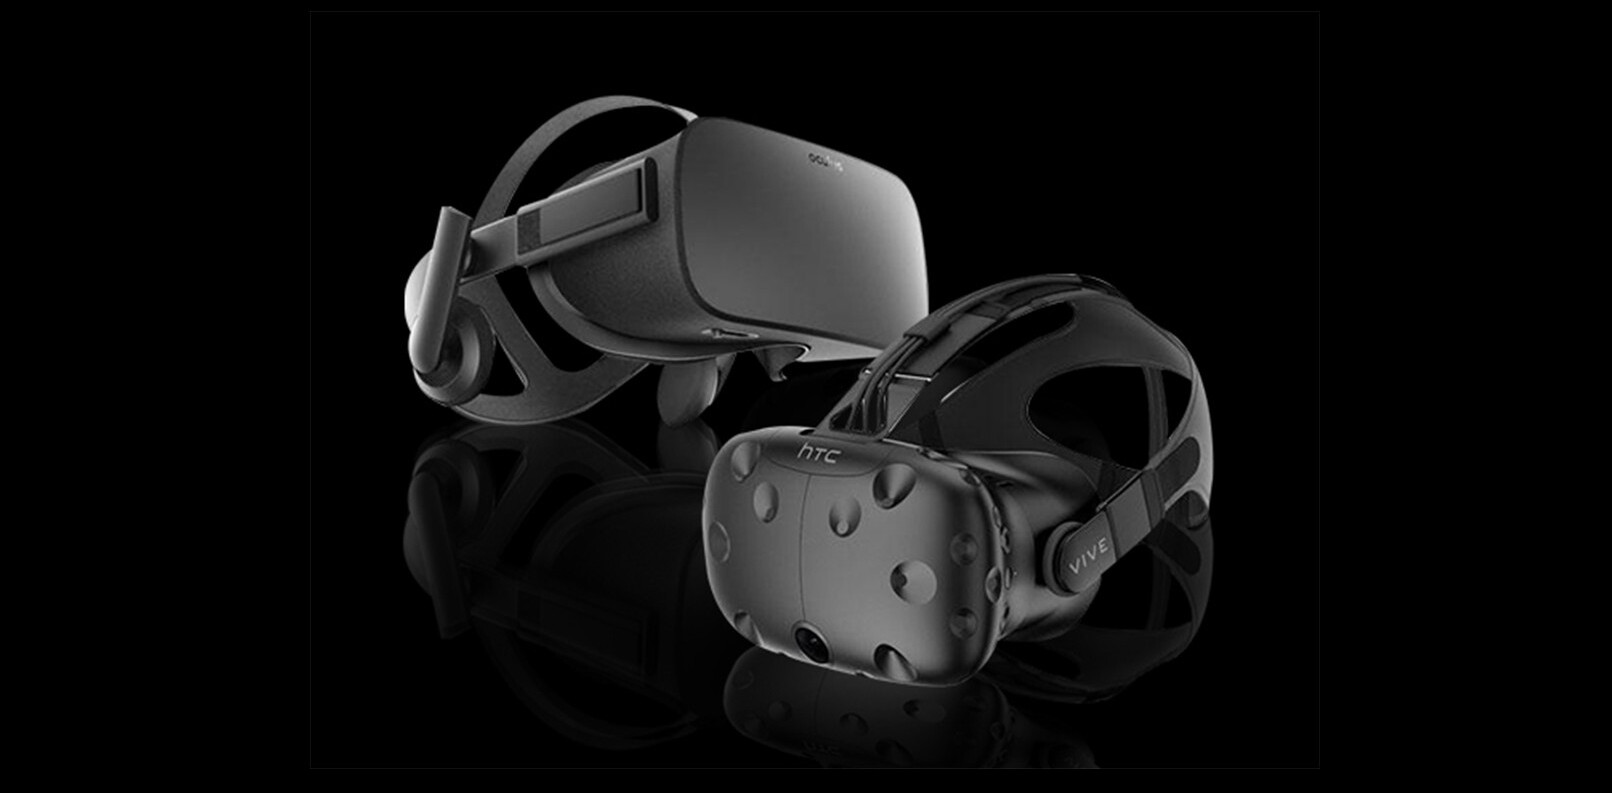 Enter to win a top-notch virtual reality headset – your choice of the Oculus Rift or HTC Vive